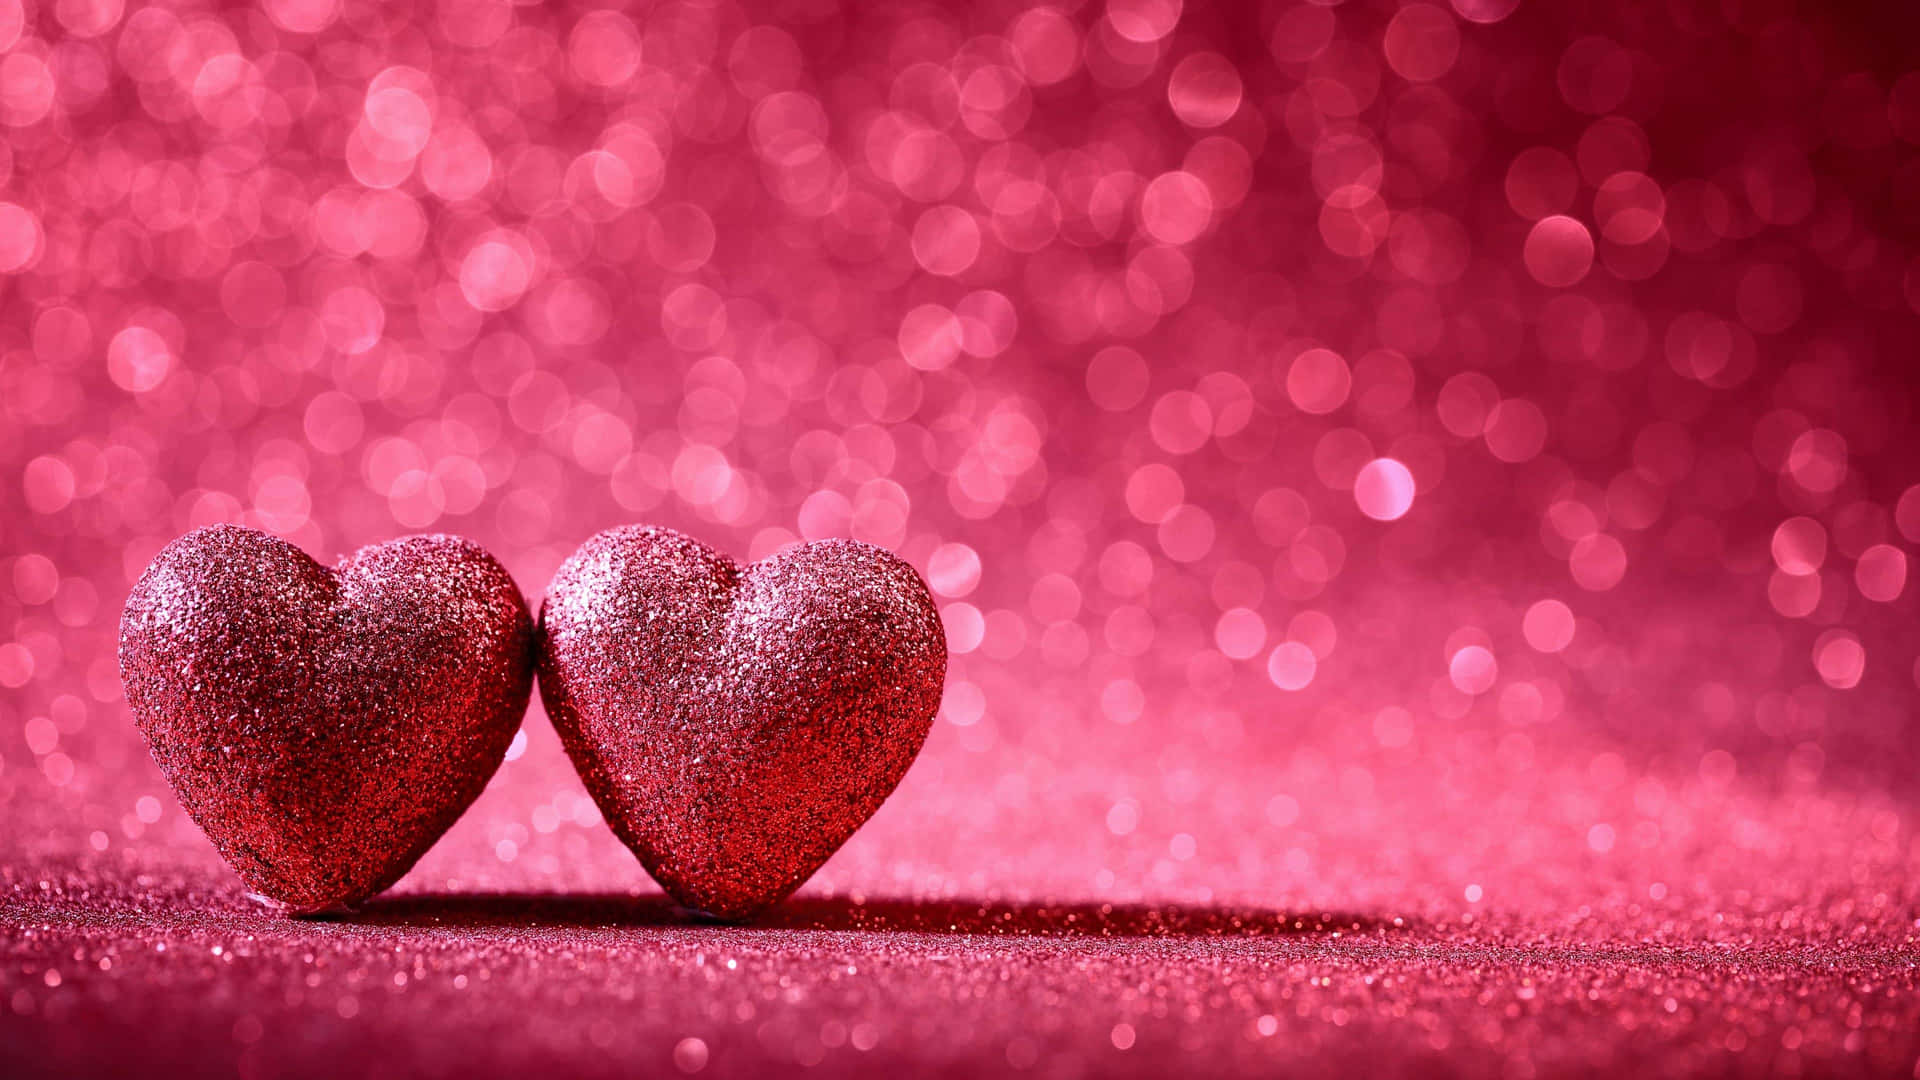 two hearts on a red background Wallpaper